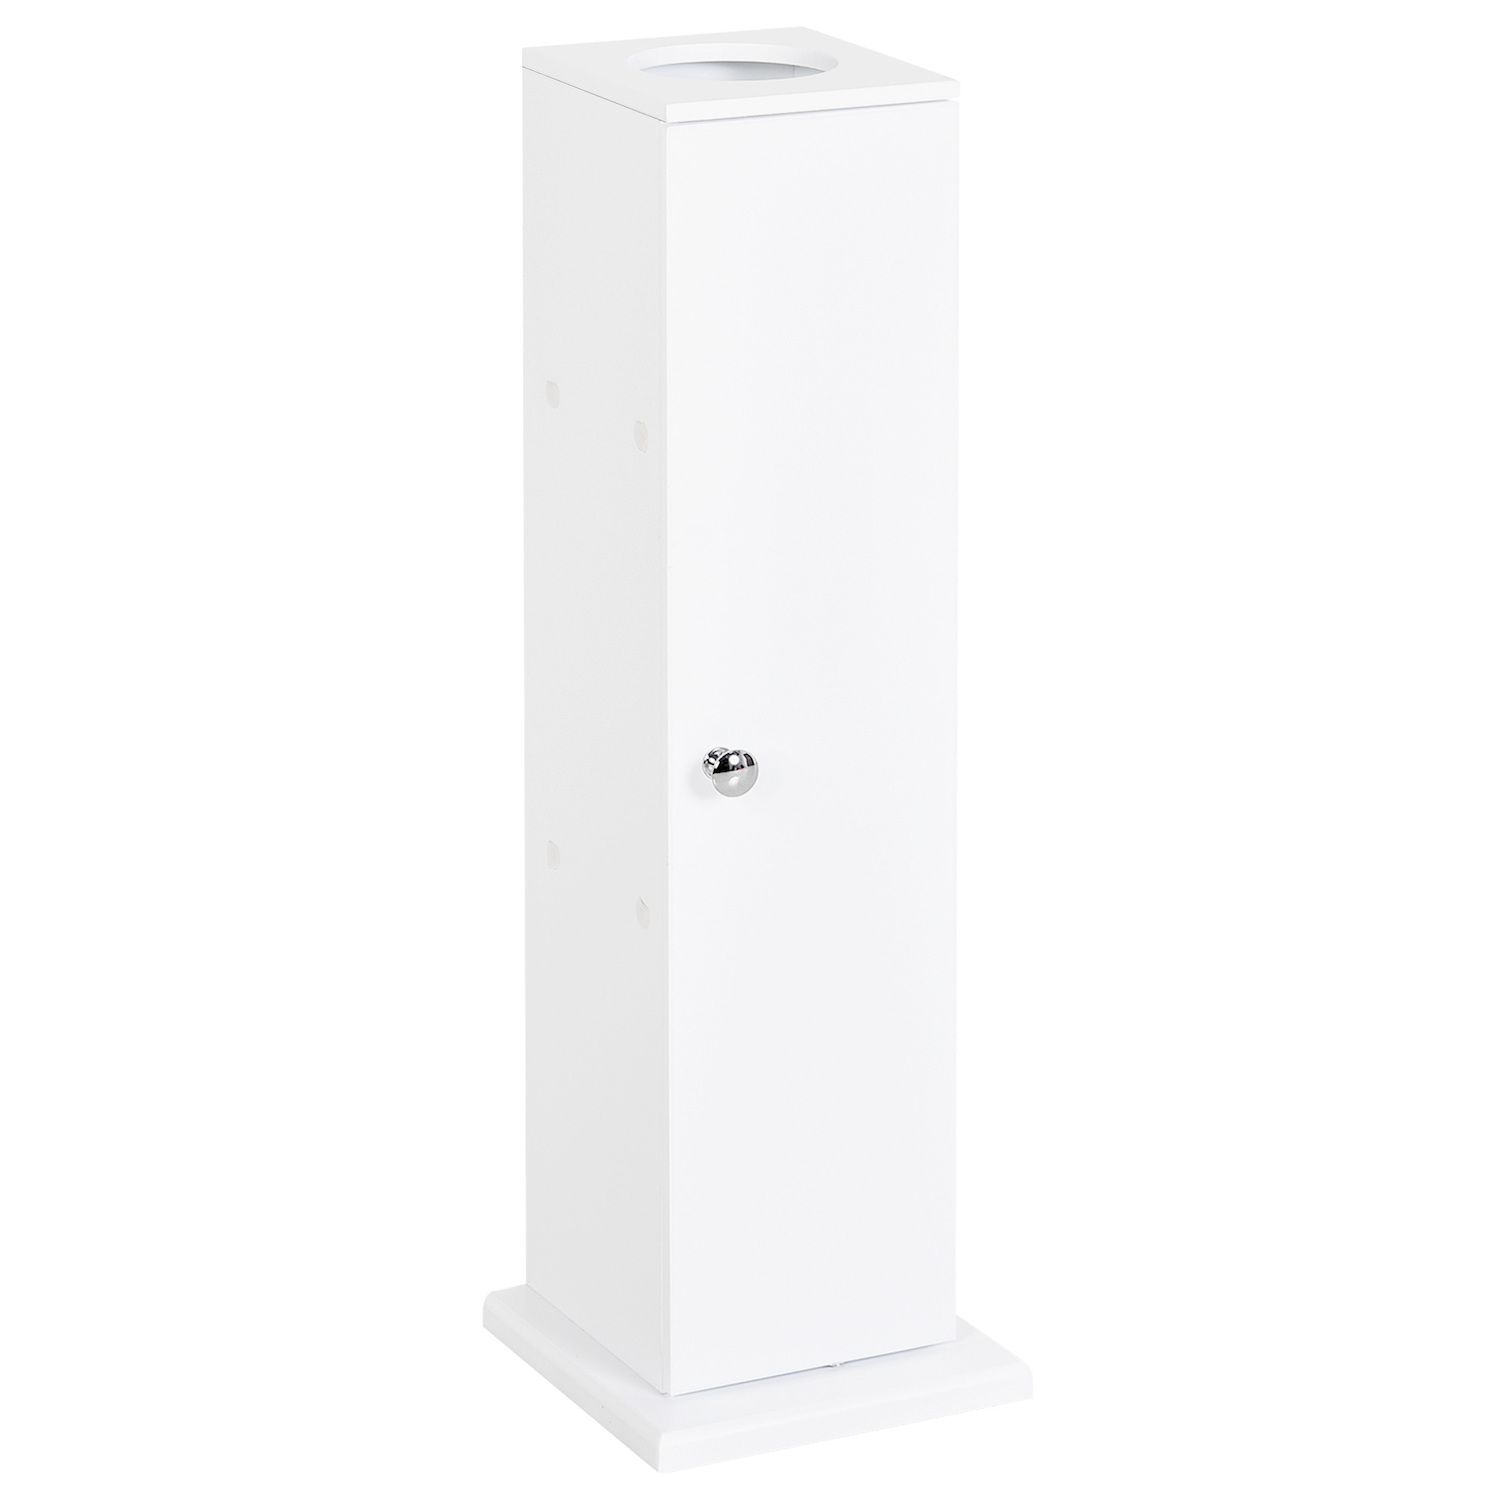 FC Design White 24 High Toilet Paper Holder Stand Stack Up to 3 Rolls | Mathis Home